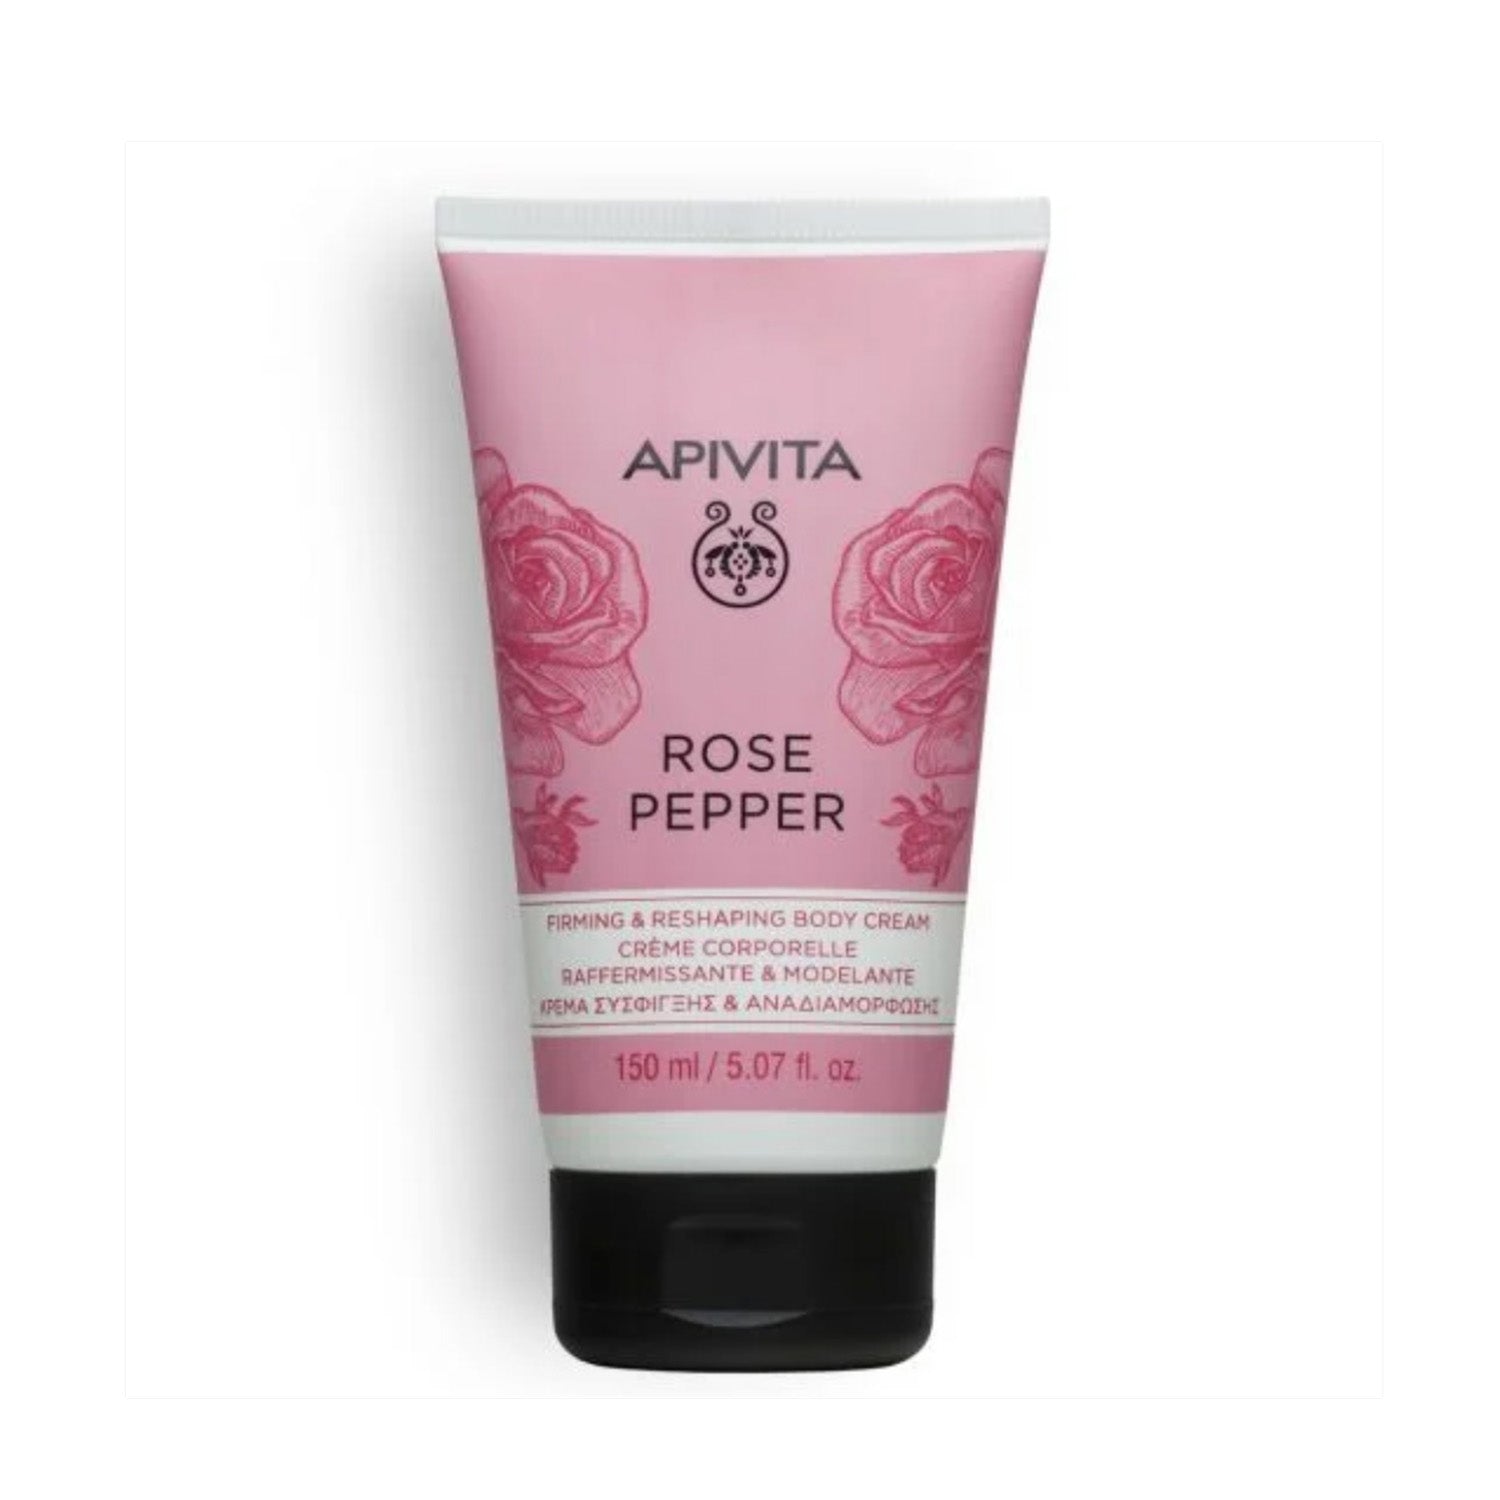 Apivita Rose Pepper Firming & Reshaping Body Cream with Pink pepper, artichoke extract and green coffee help to enhance the skin's firmness, stimulate lipolysis and improve microcirculation, resulting in a more youthful-looking complexion.